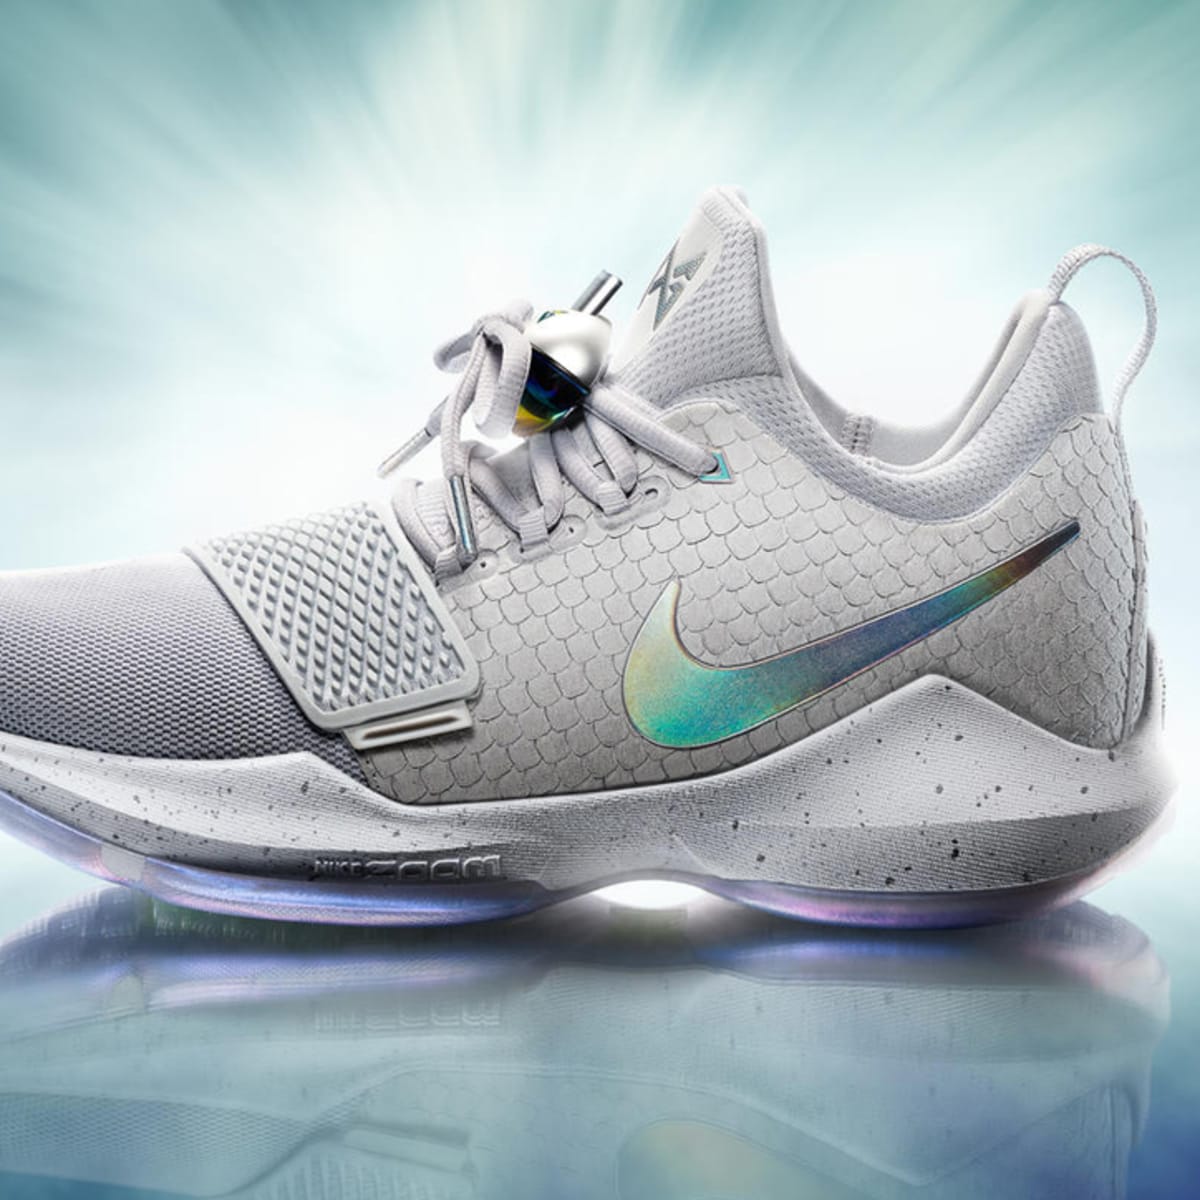 Put On For Your City in These Nike Signature Sneakers